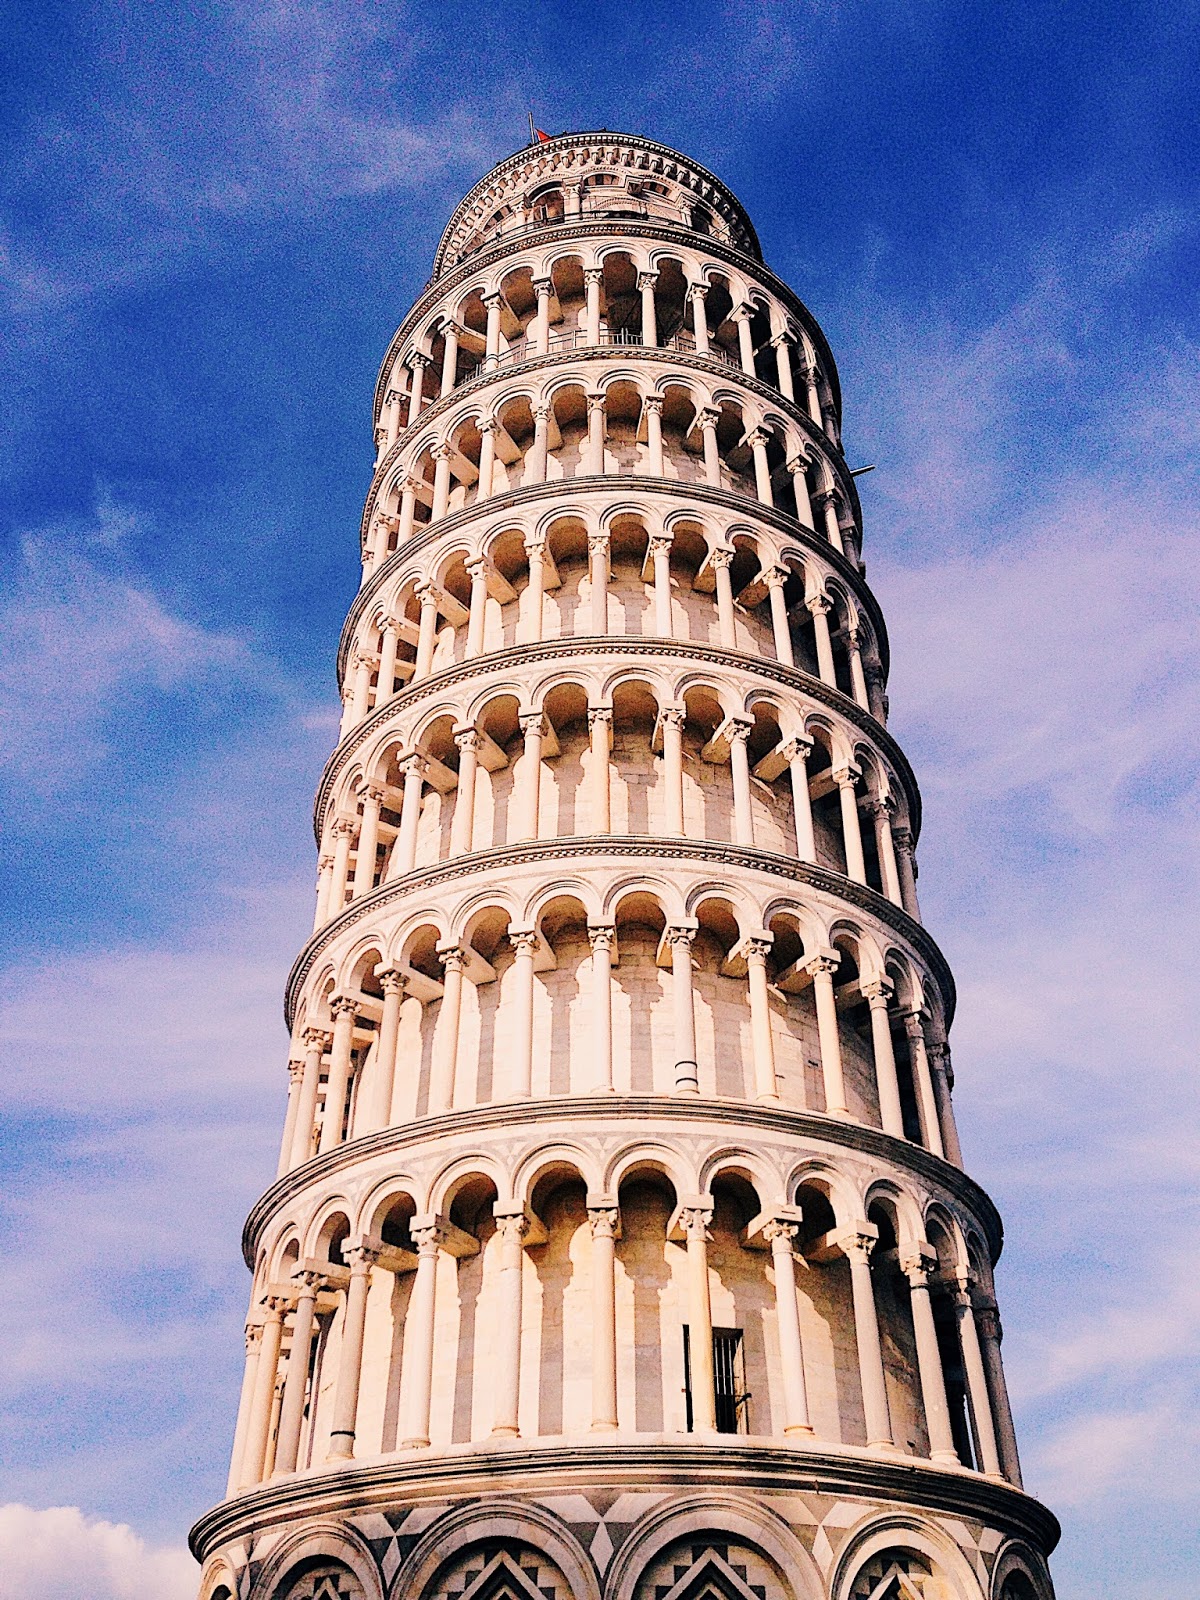 tuscany, pisa, leaning tower of pisa view, indian blog, indian blogger, top indian blog, indian luxury blog, uk blog, british blog, london blog, delhi blogger, delhi travel blogger, indian travel blog, italy, why u must visit italy, places to go in italy, italy food culture, italy travel guide, reasons to go to italy, must visit places on earth, must visit countries, summer trip, where to go in summer, italian people, europe trip, venice, indian and italian, real italy